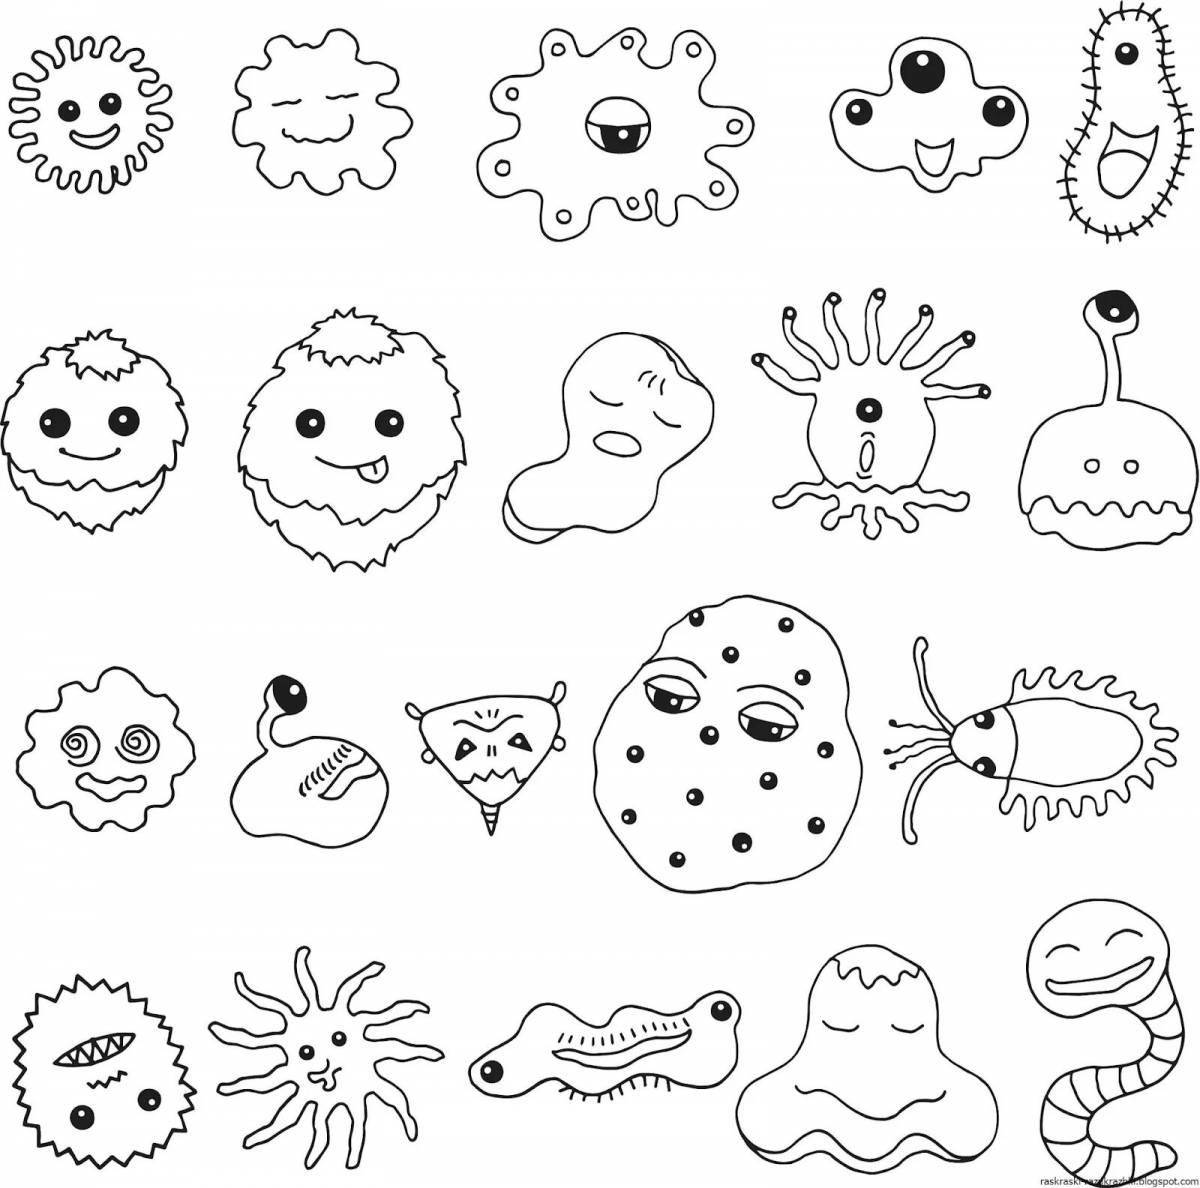 Fun coloring pages of microbes for kids